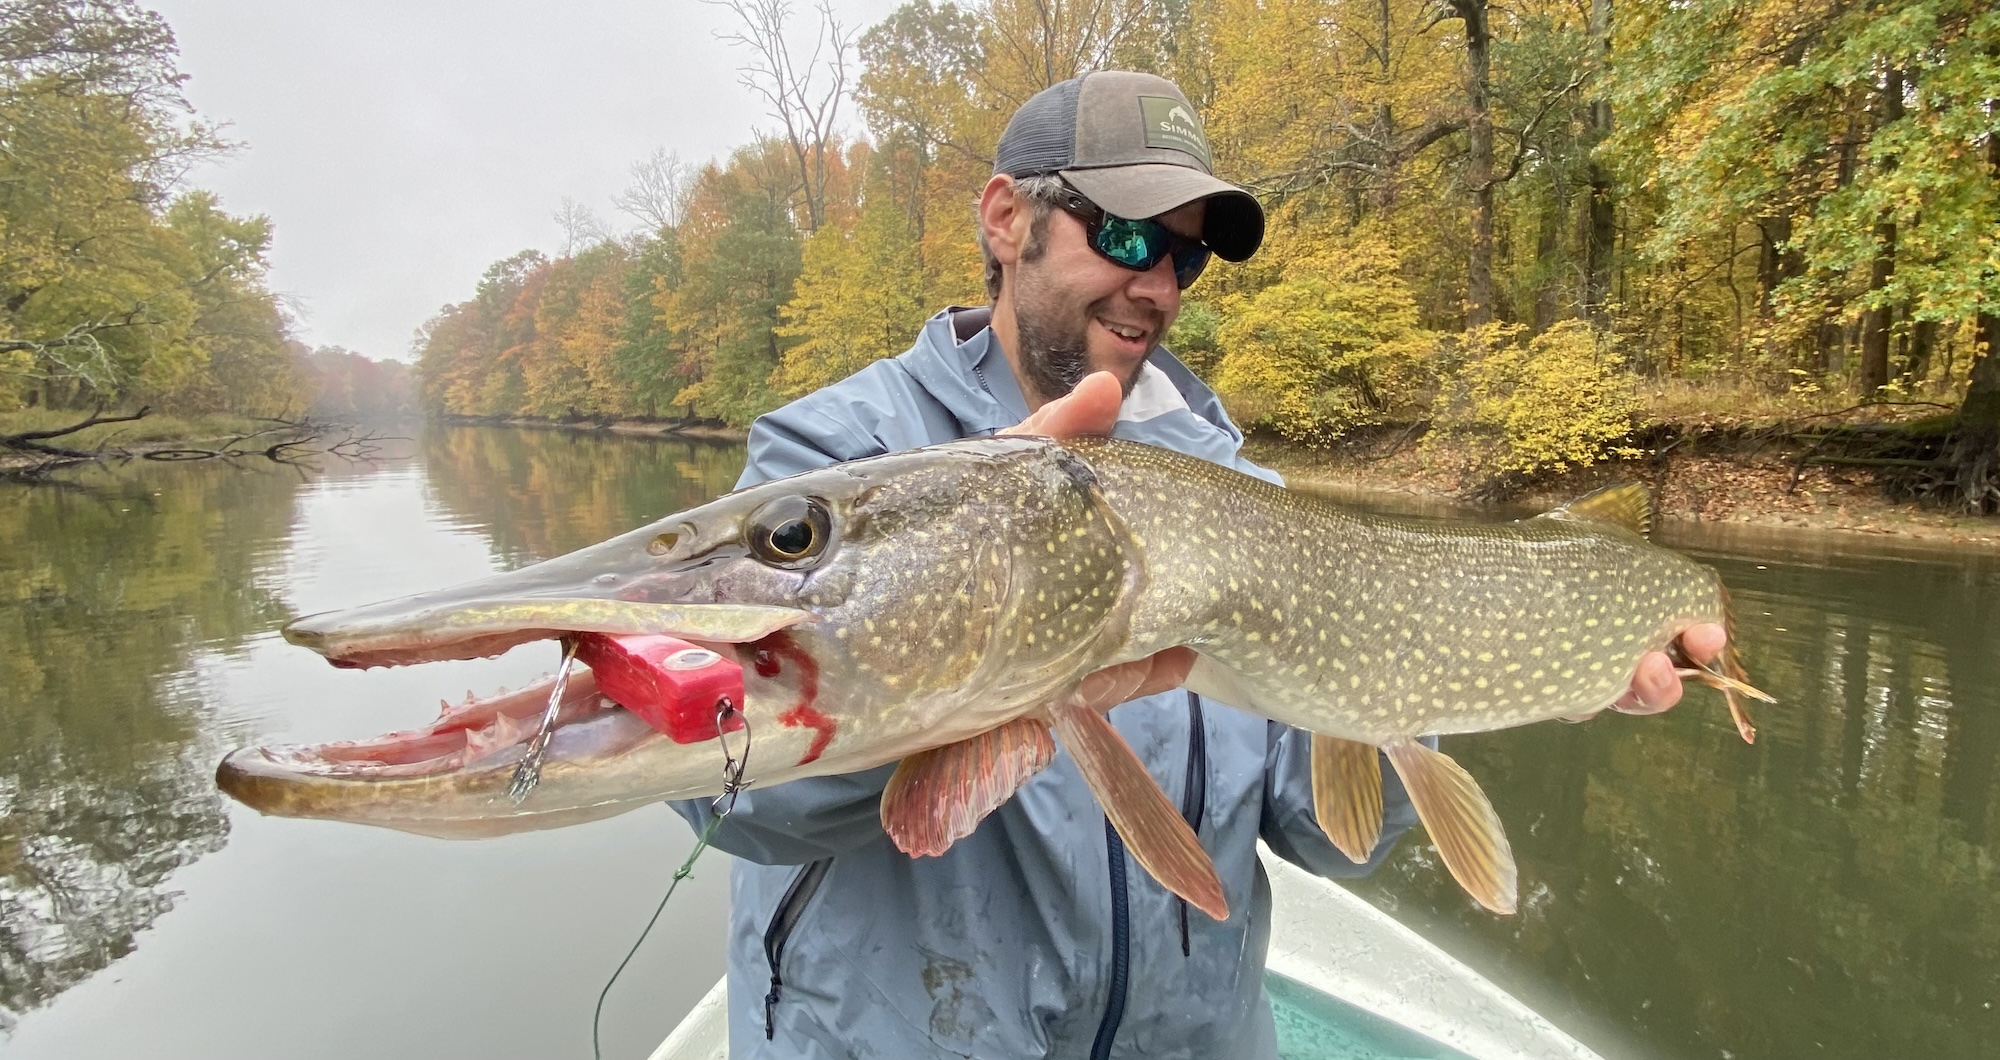 A pike fisherman holds up a nice pike on a boat in a river.